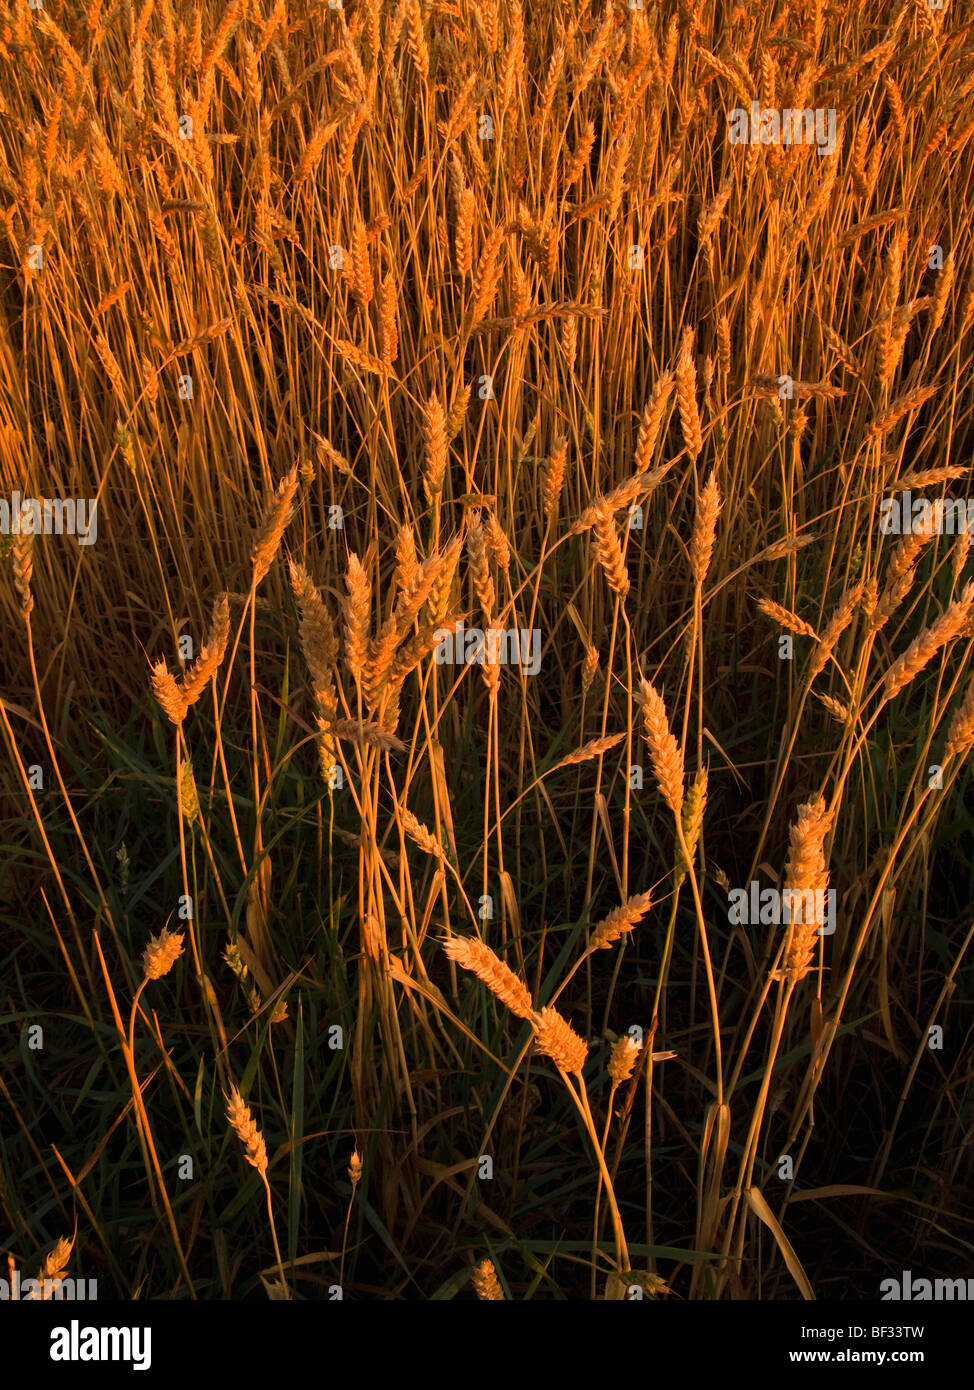 Agriculture - Mature, harvest ready awnless (beardless) wheat in early morning light / Alberta, Canada. Stock Photo